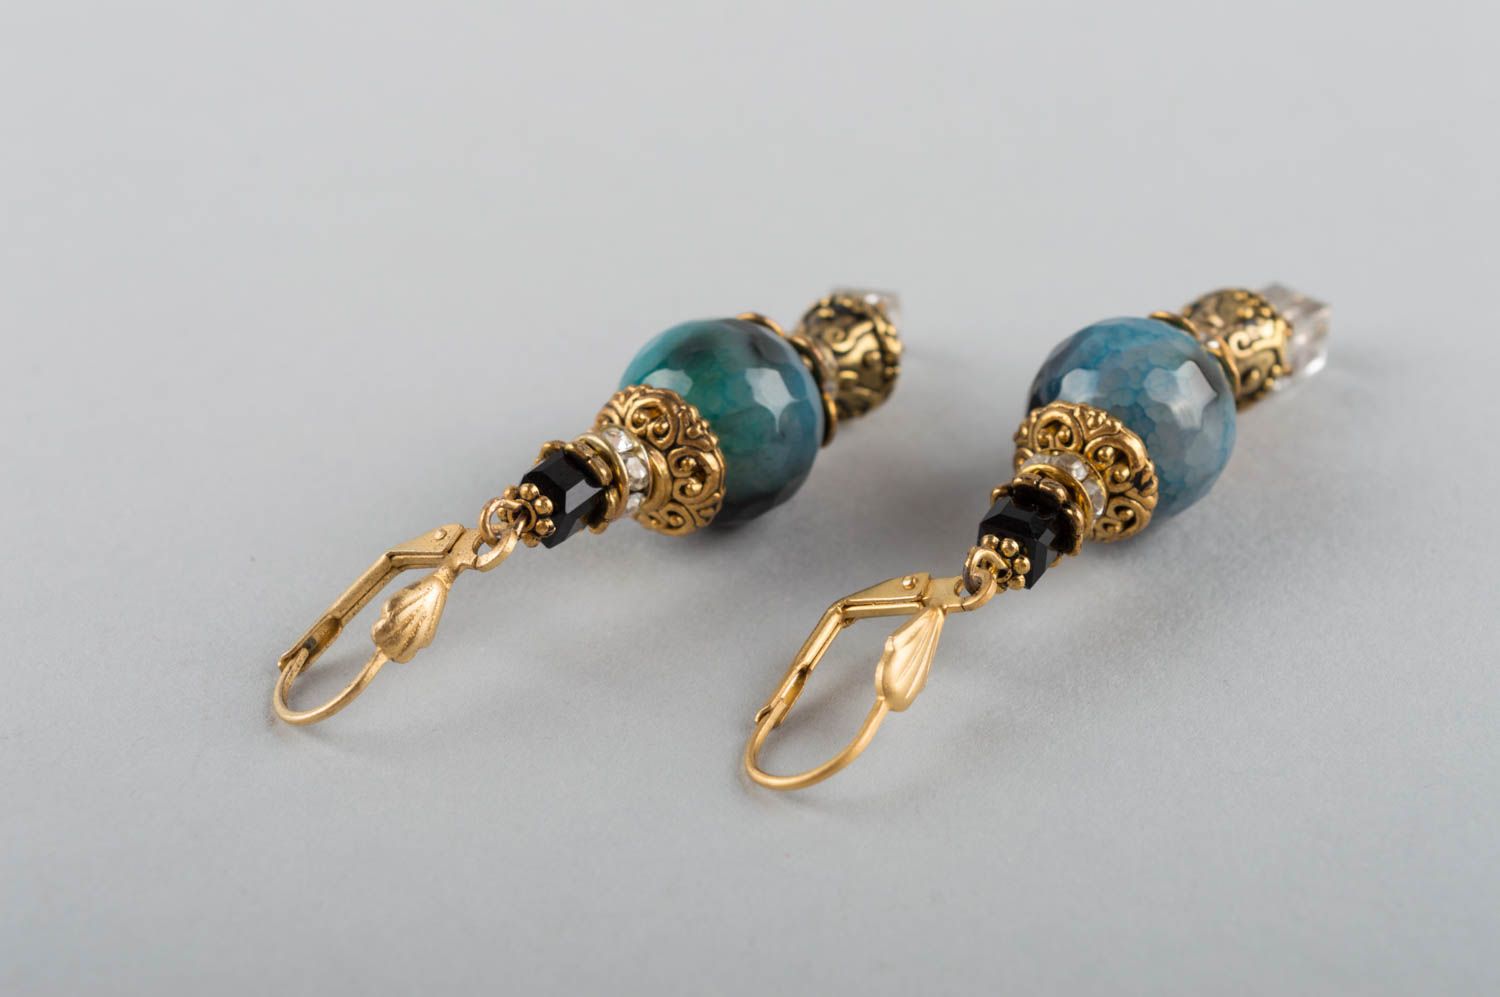 Handmade natural stones earrings brass earrings with agate and crystal photo 4